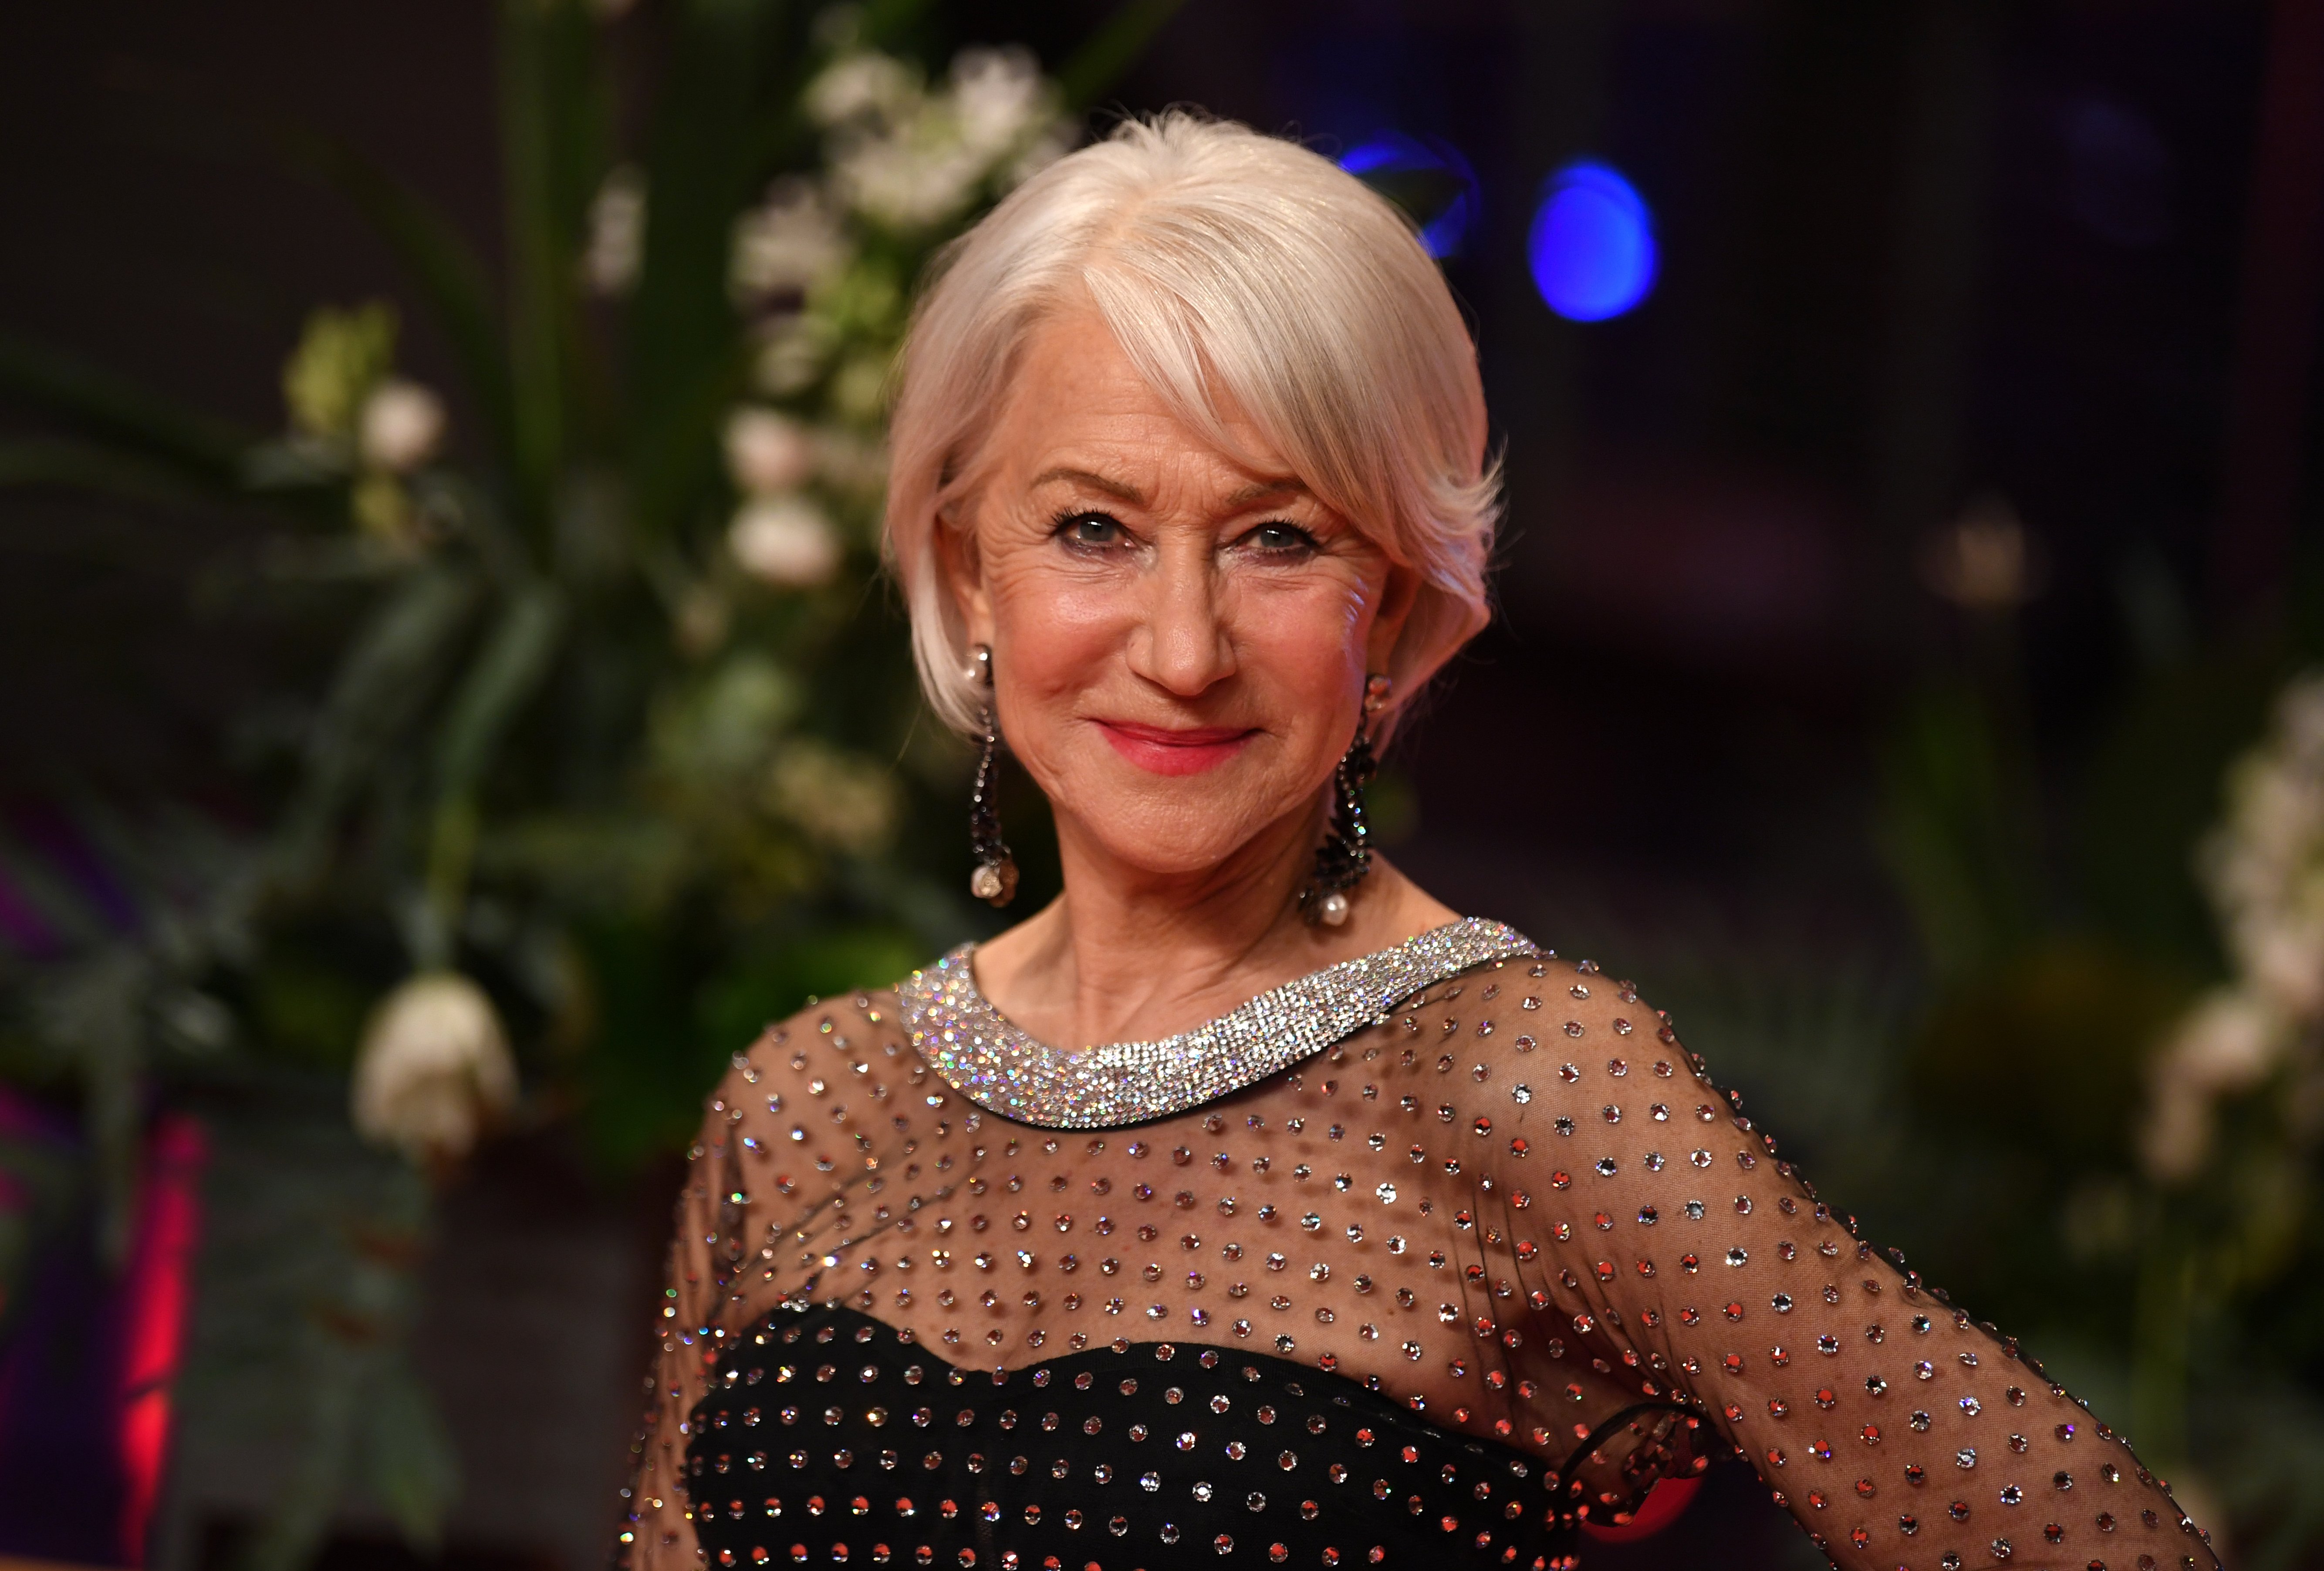 Dame Helen Mirren during the 70th Berlinale International Film Festival on February 27, 2020 in Berlin, Germany. / Source: Getty Images